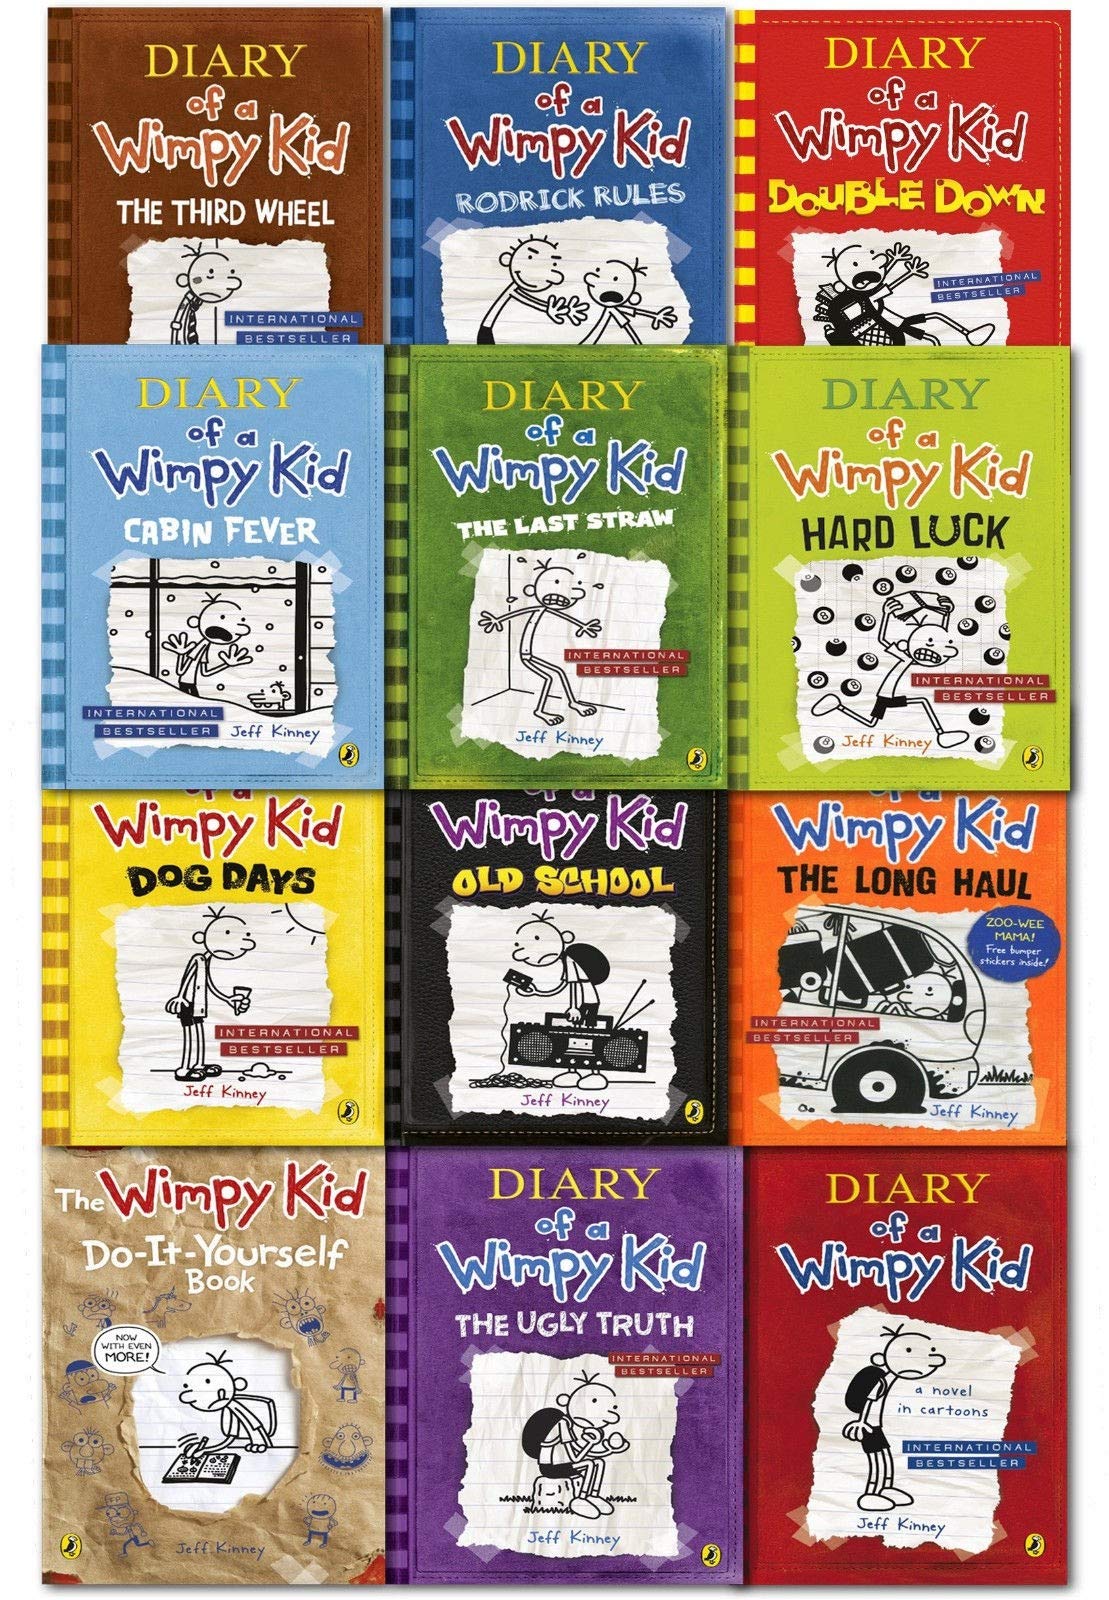 Diary Of A Wimpy Kid Collection by Jeff Kinney (12 Books Set